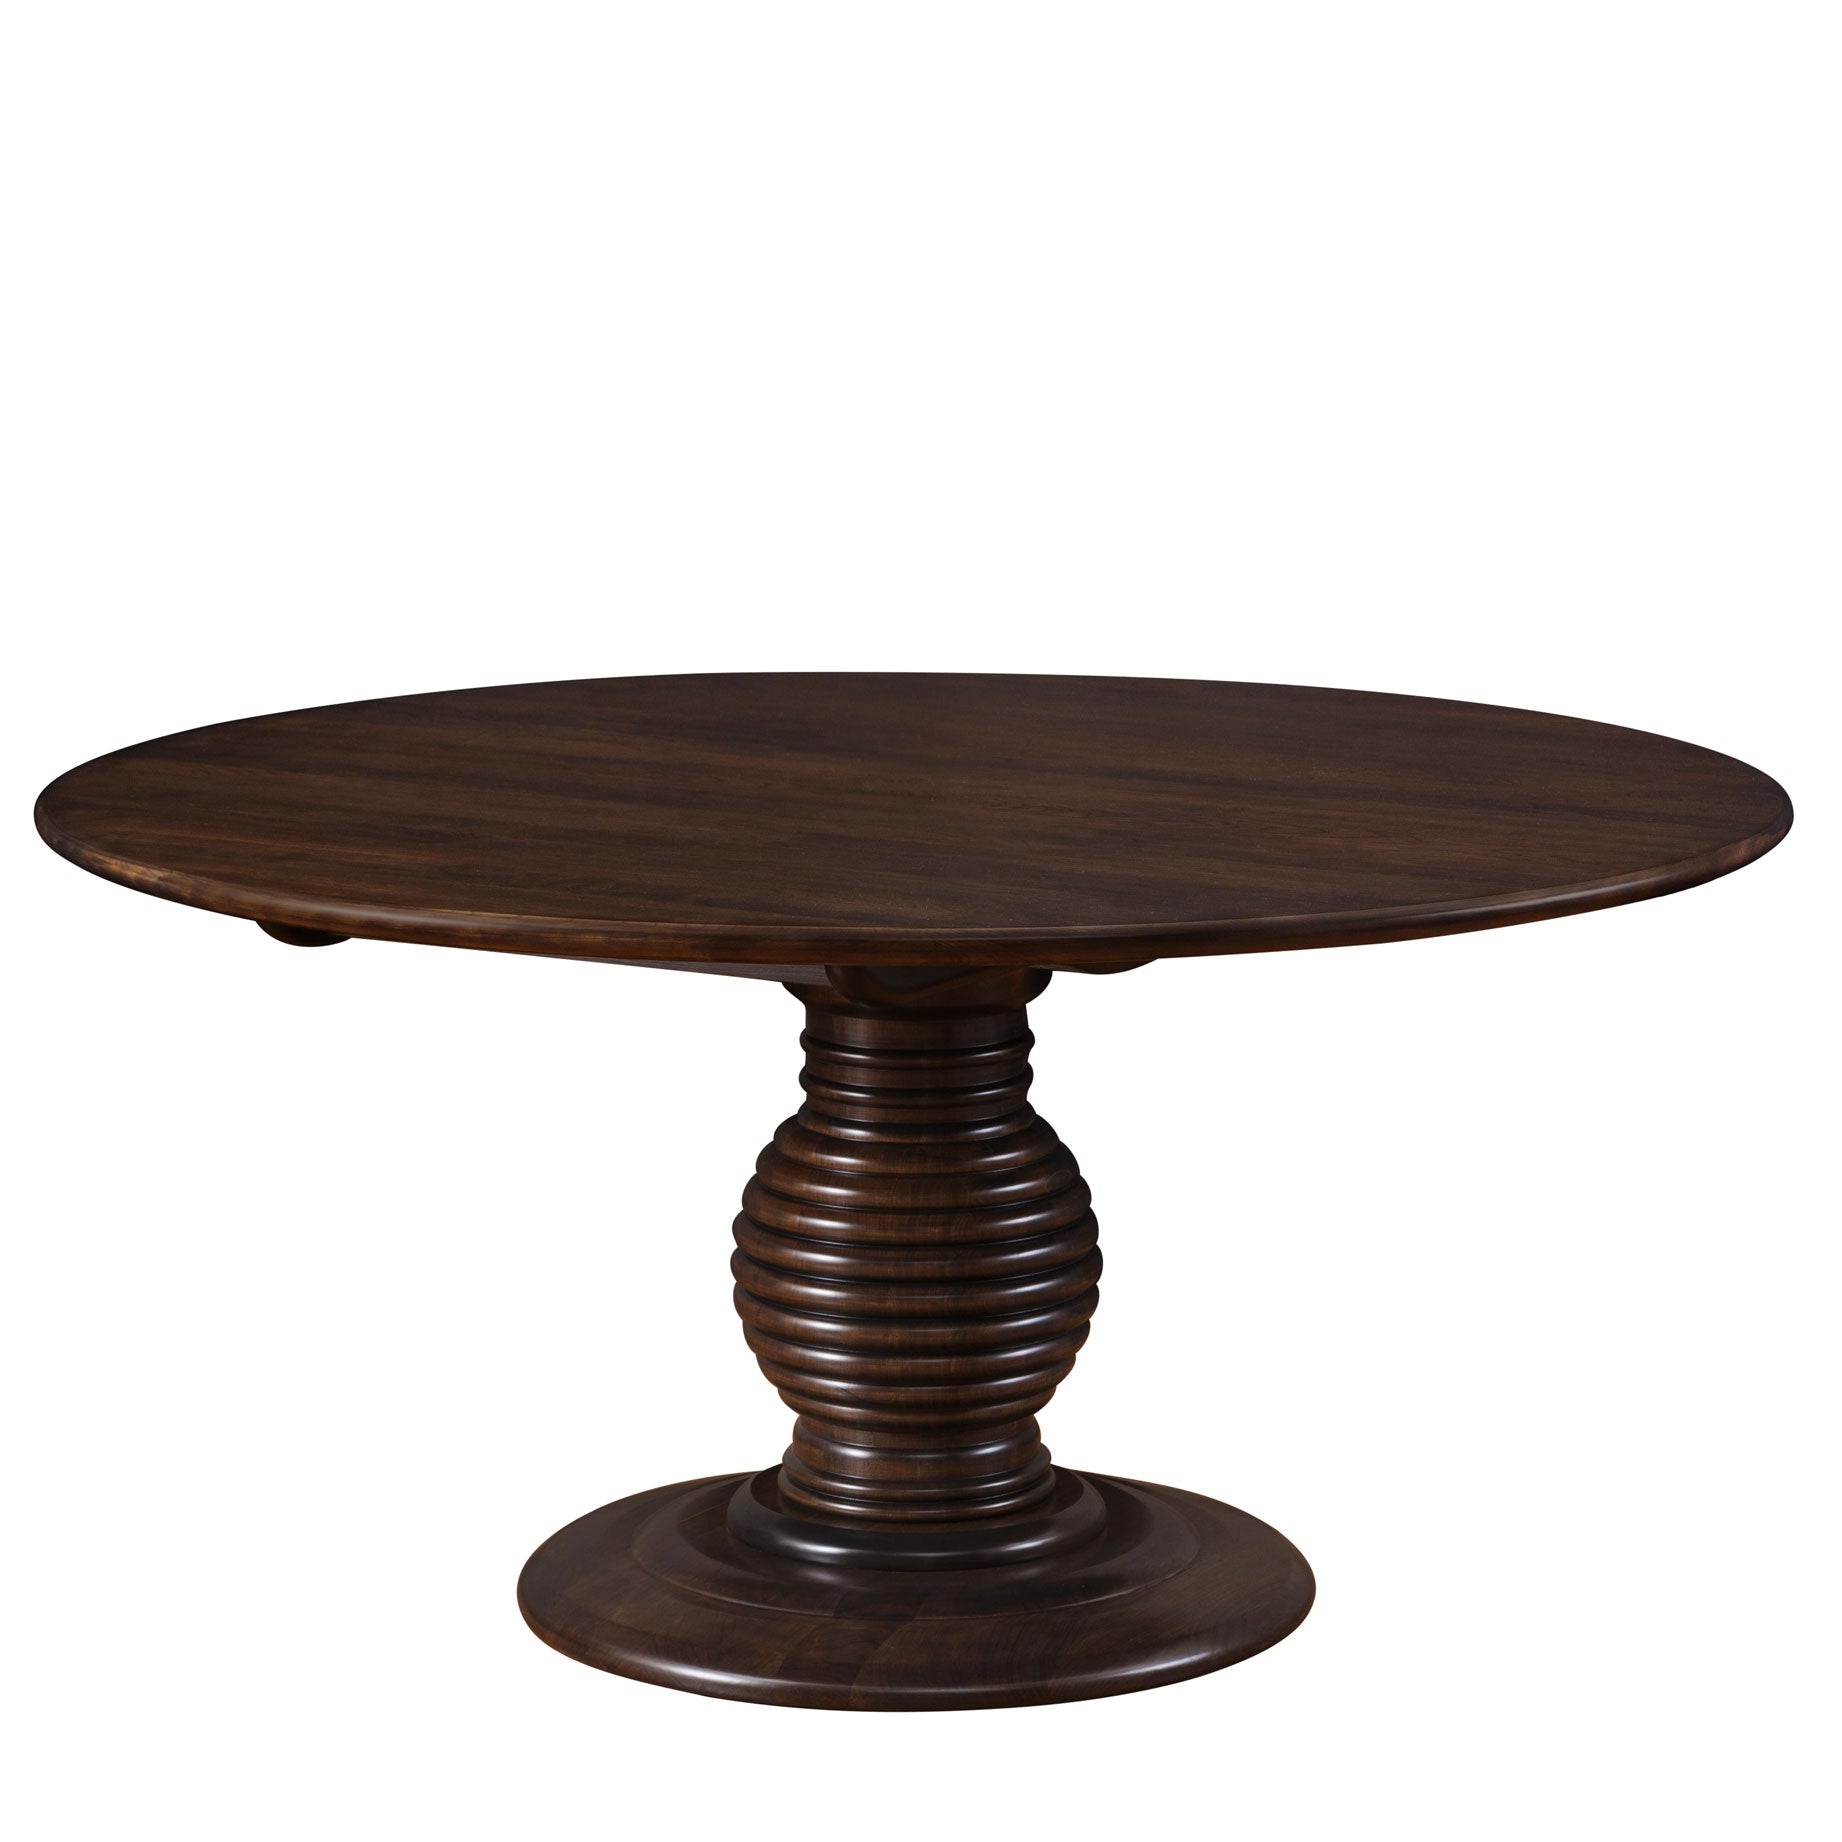 Hive Table - snyders.furniture